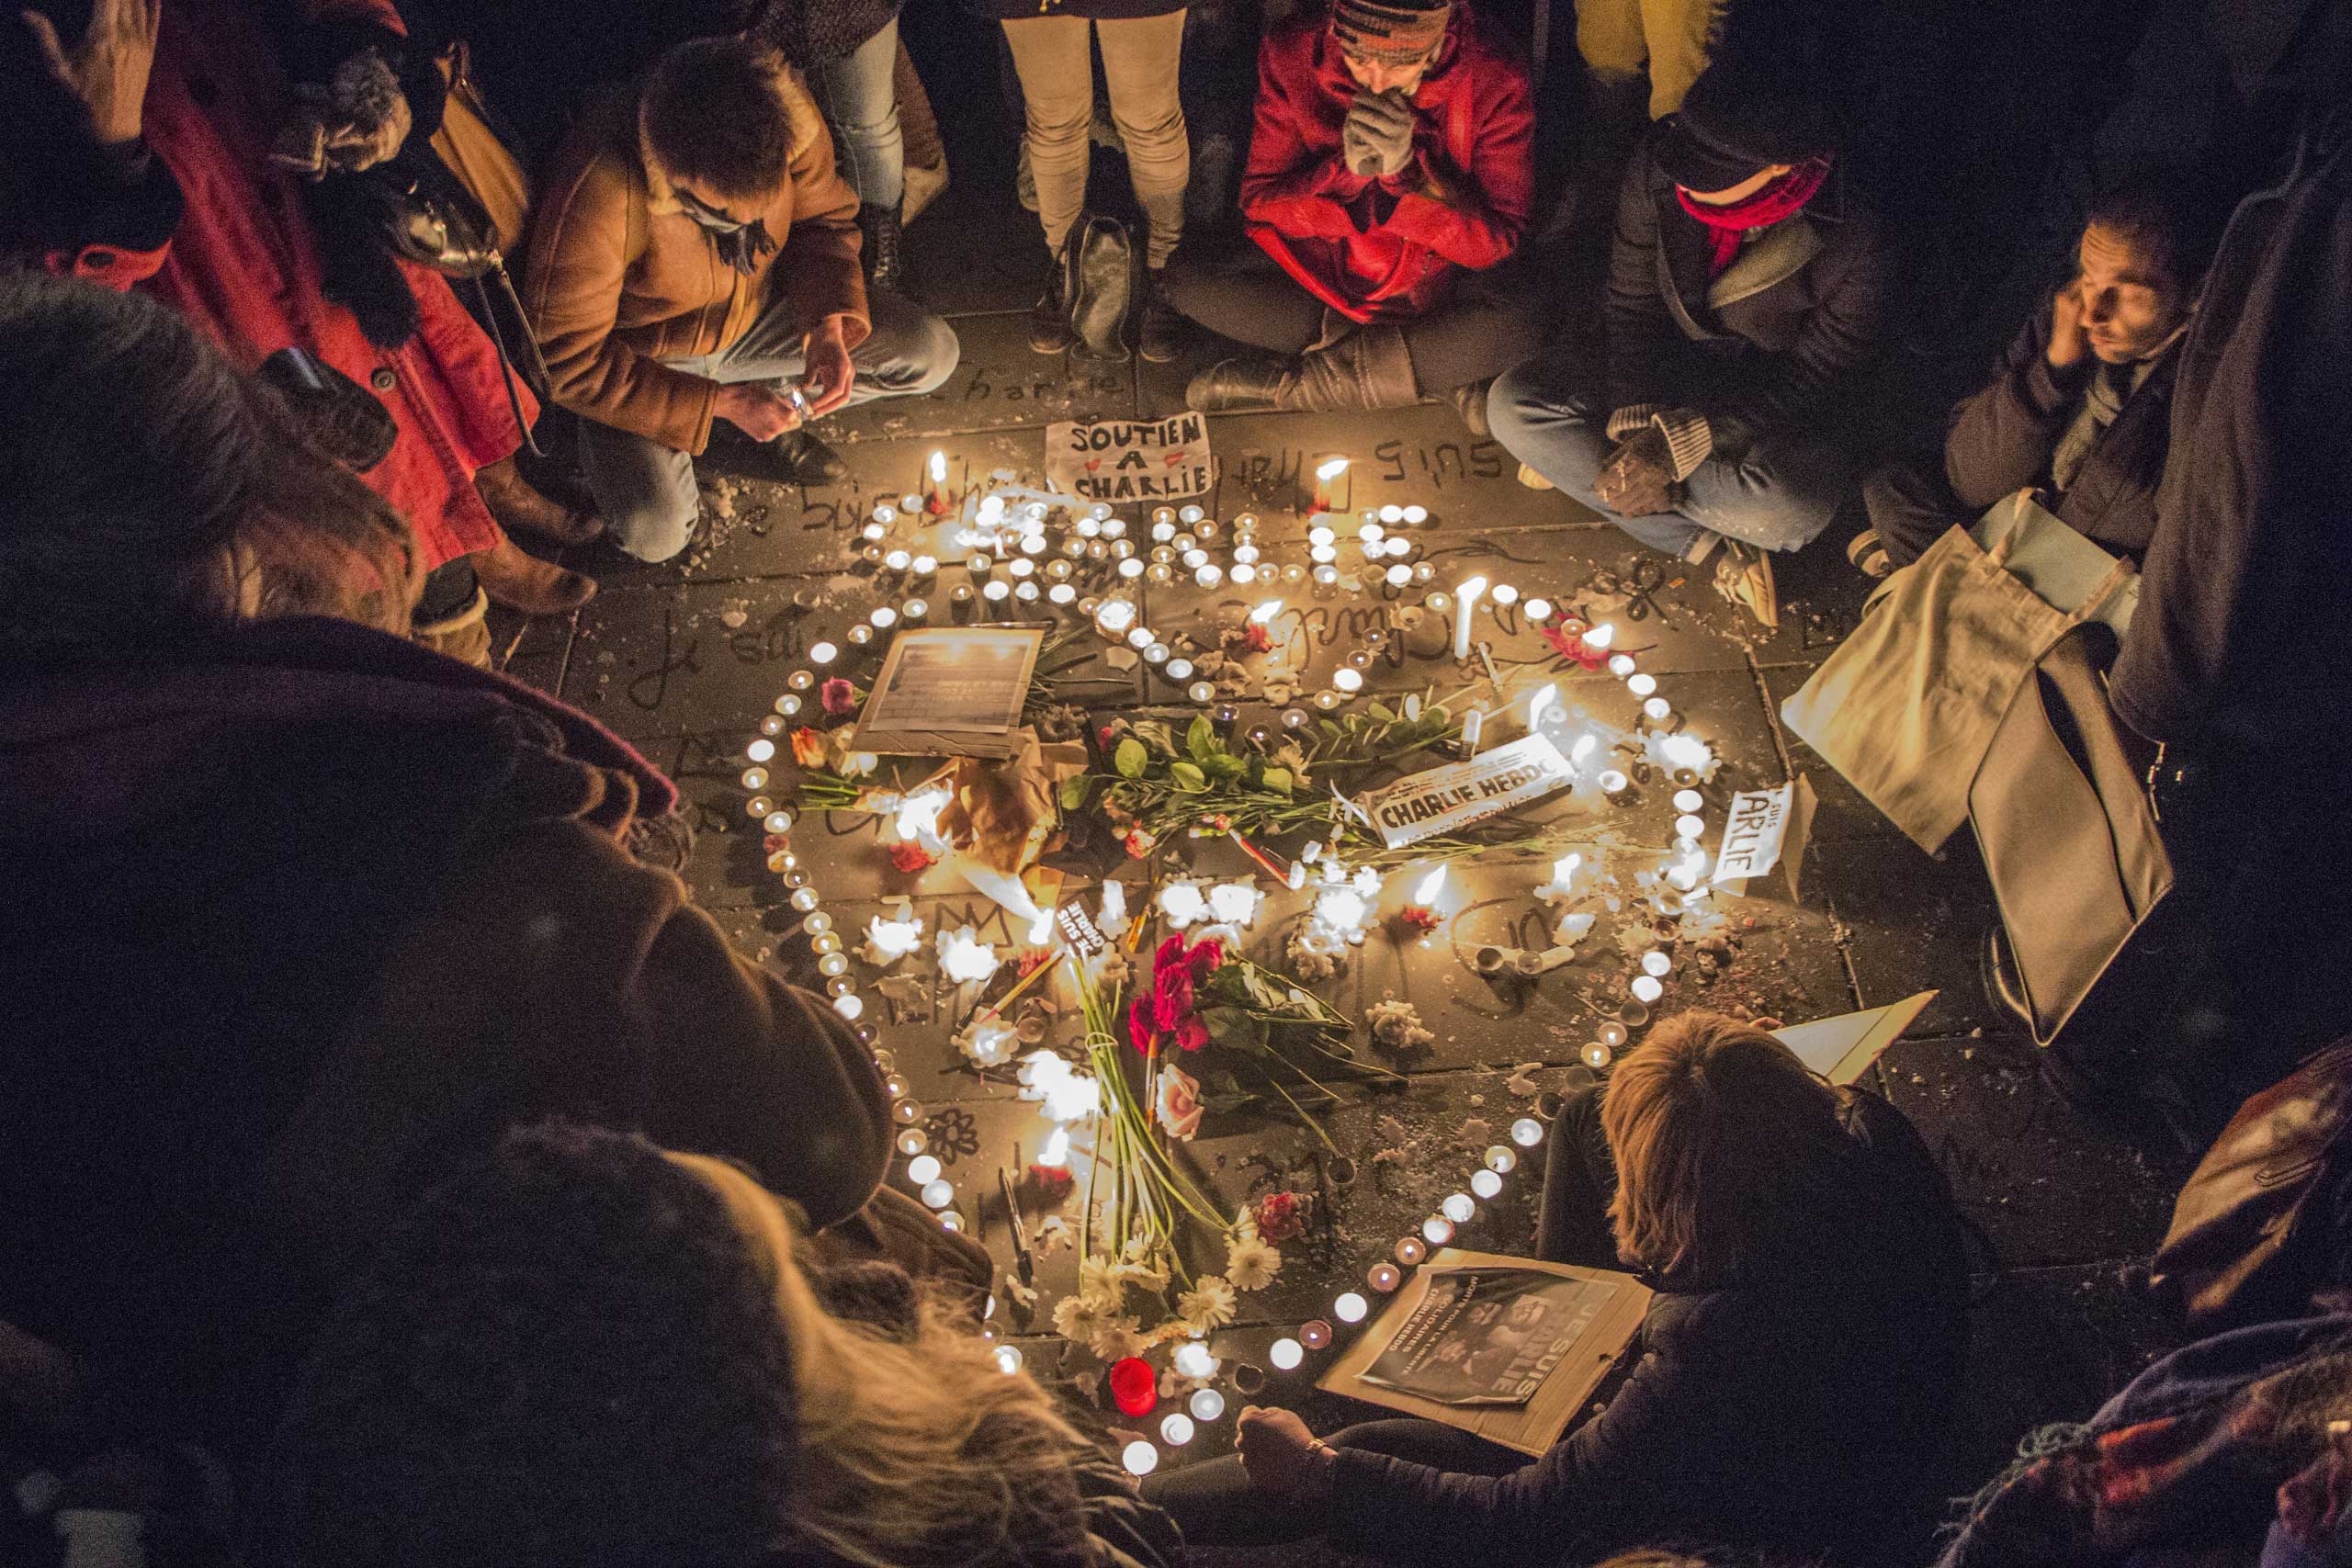 A tribute of flowers and candles in the shape of a heart is set up at Place de la Republique in Paris in memory of the victims of the Charlie Hebdo terrorist attack, on Jan. 7, 2015 in Paris.